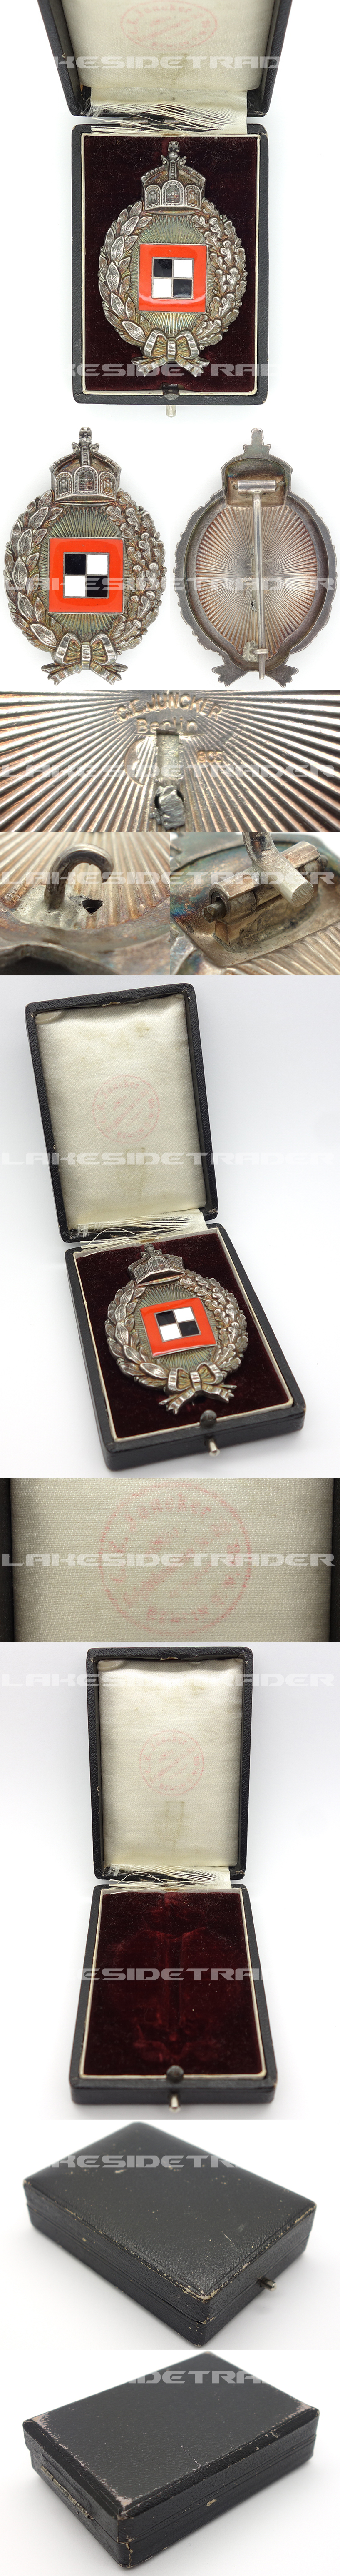 Cased Imperial Prussian Observer Badge by Juncker